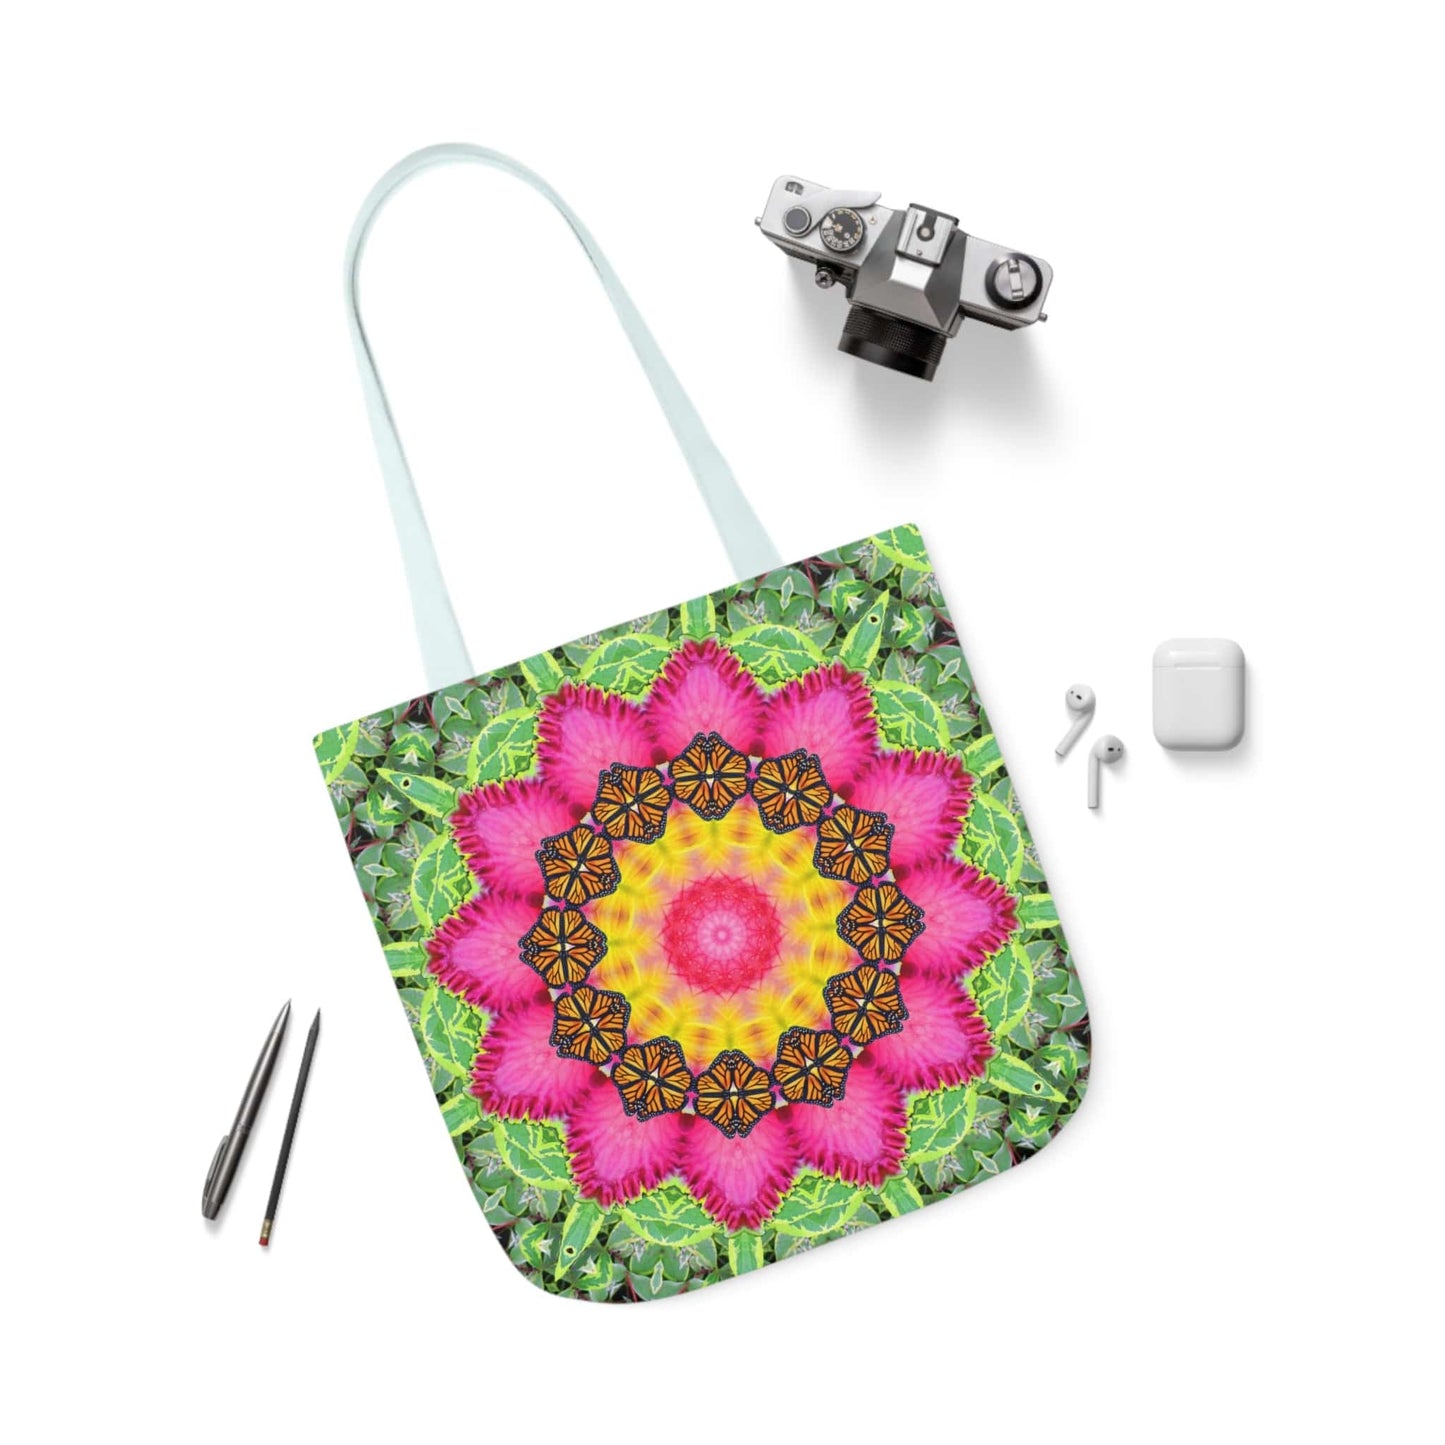 Cute Canvas Tote Bag with Monarch Butterfly and Floral Mandala - Everyday Bag